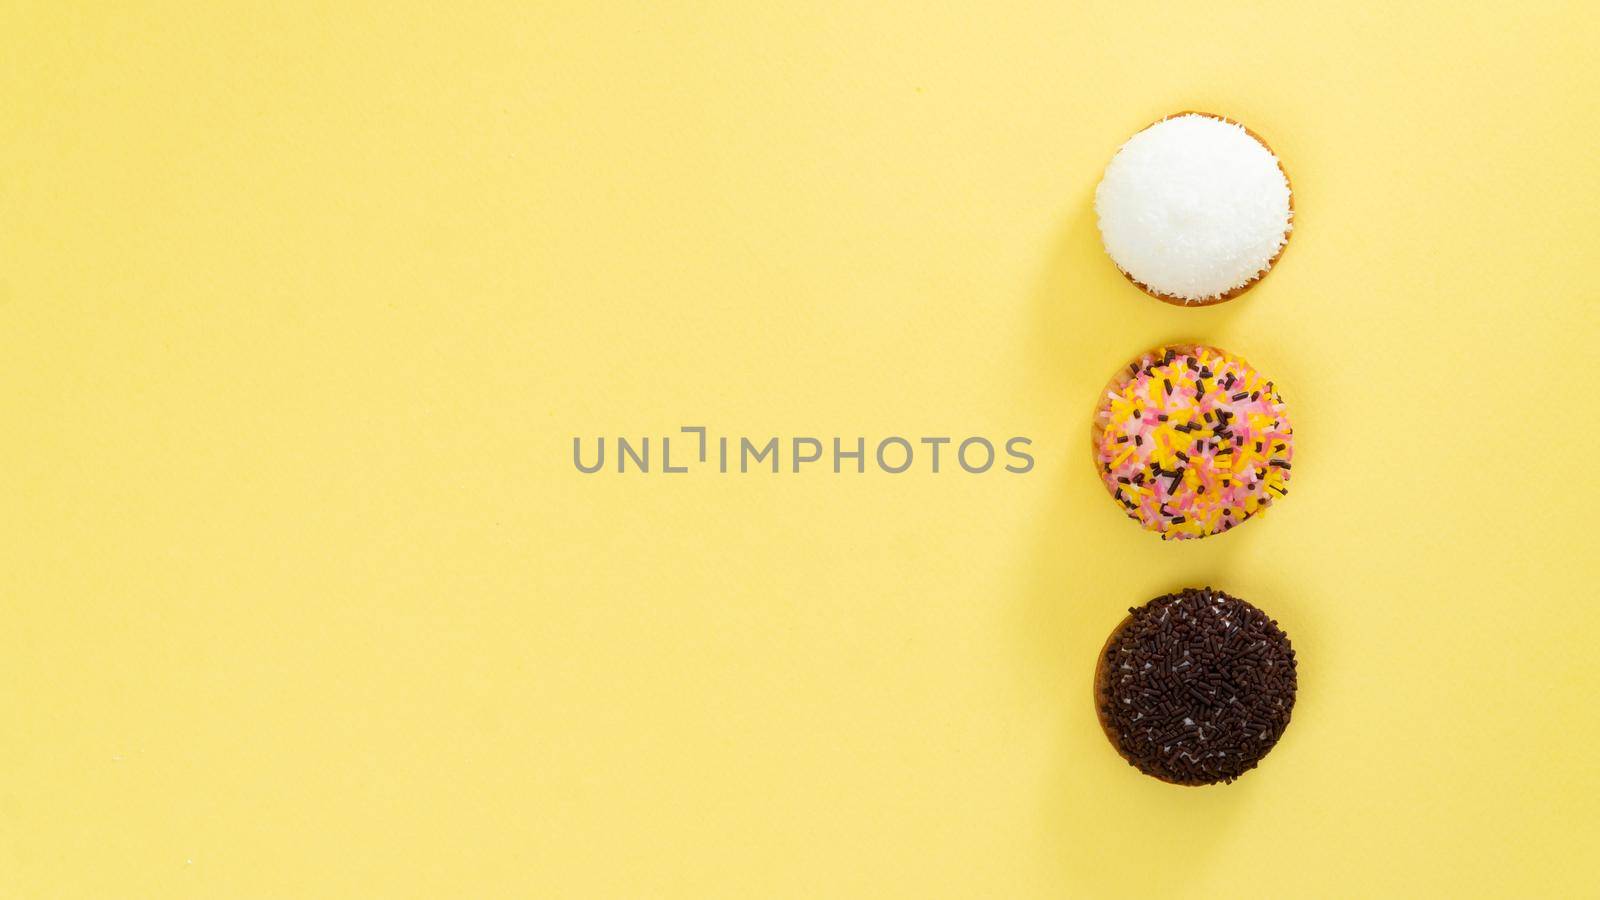 Cakes on a yellow background - sweet food, background with space for inscription. High quality photo